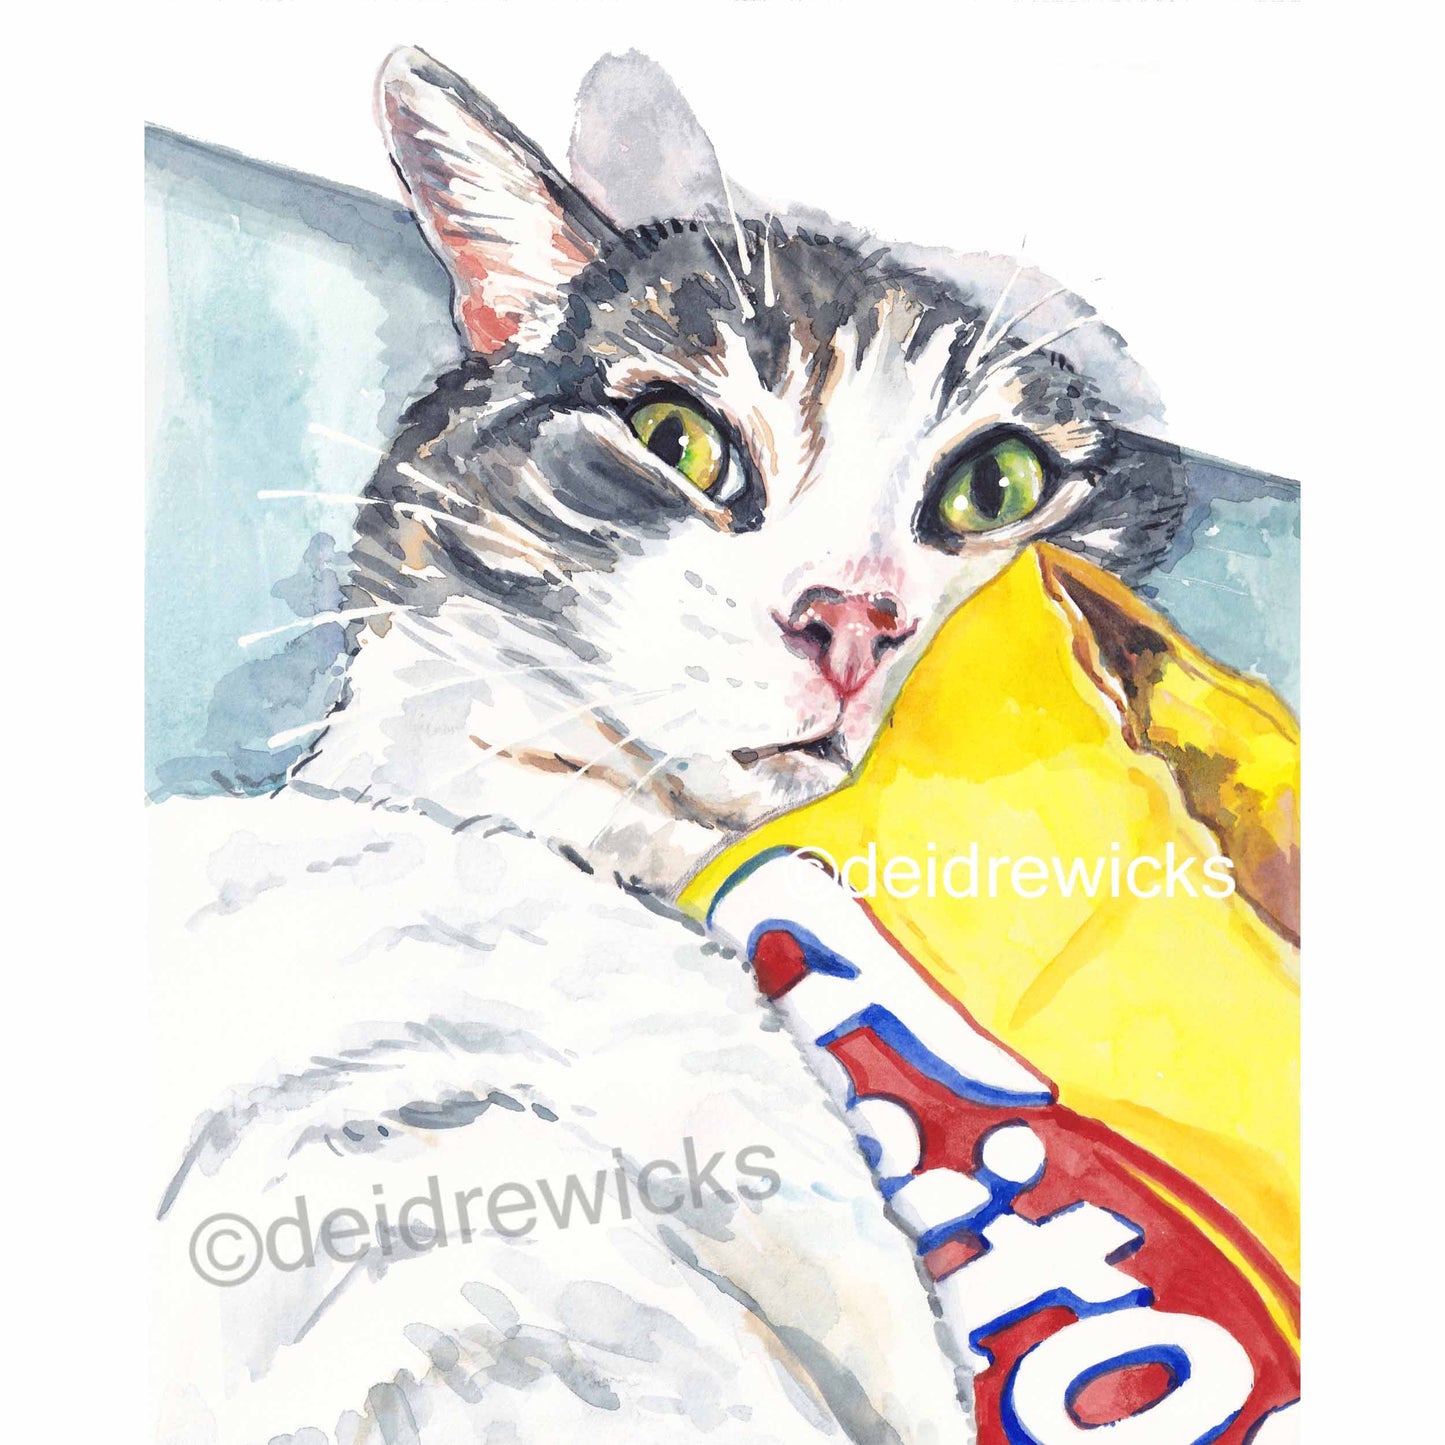 Watercolour painting of a grey tabby cat who won't share her corn chips. Art by Deidre Wicks